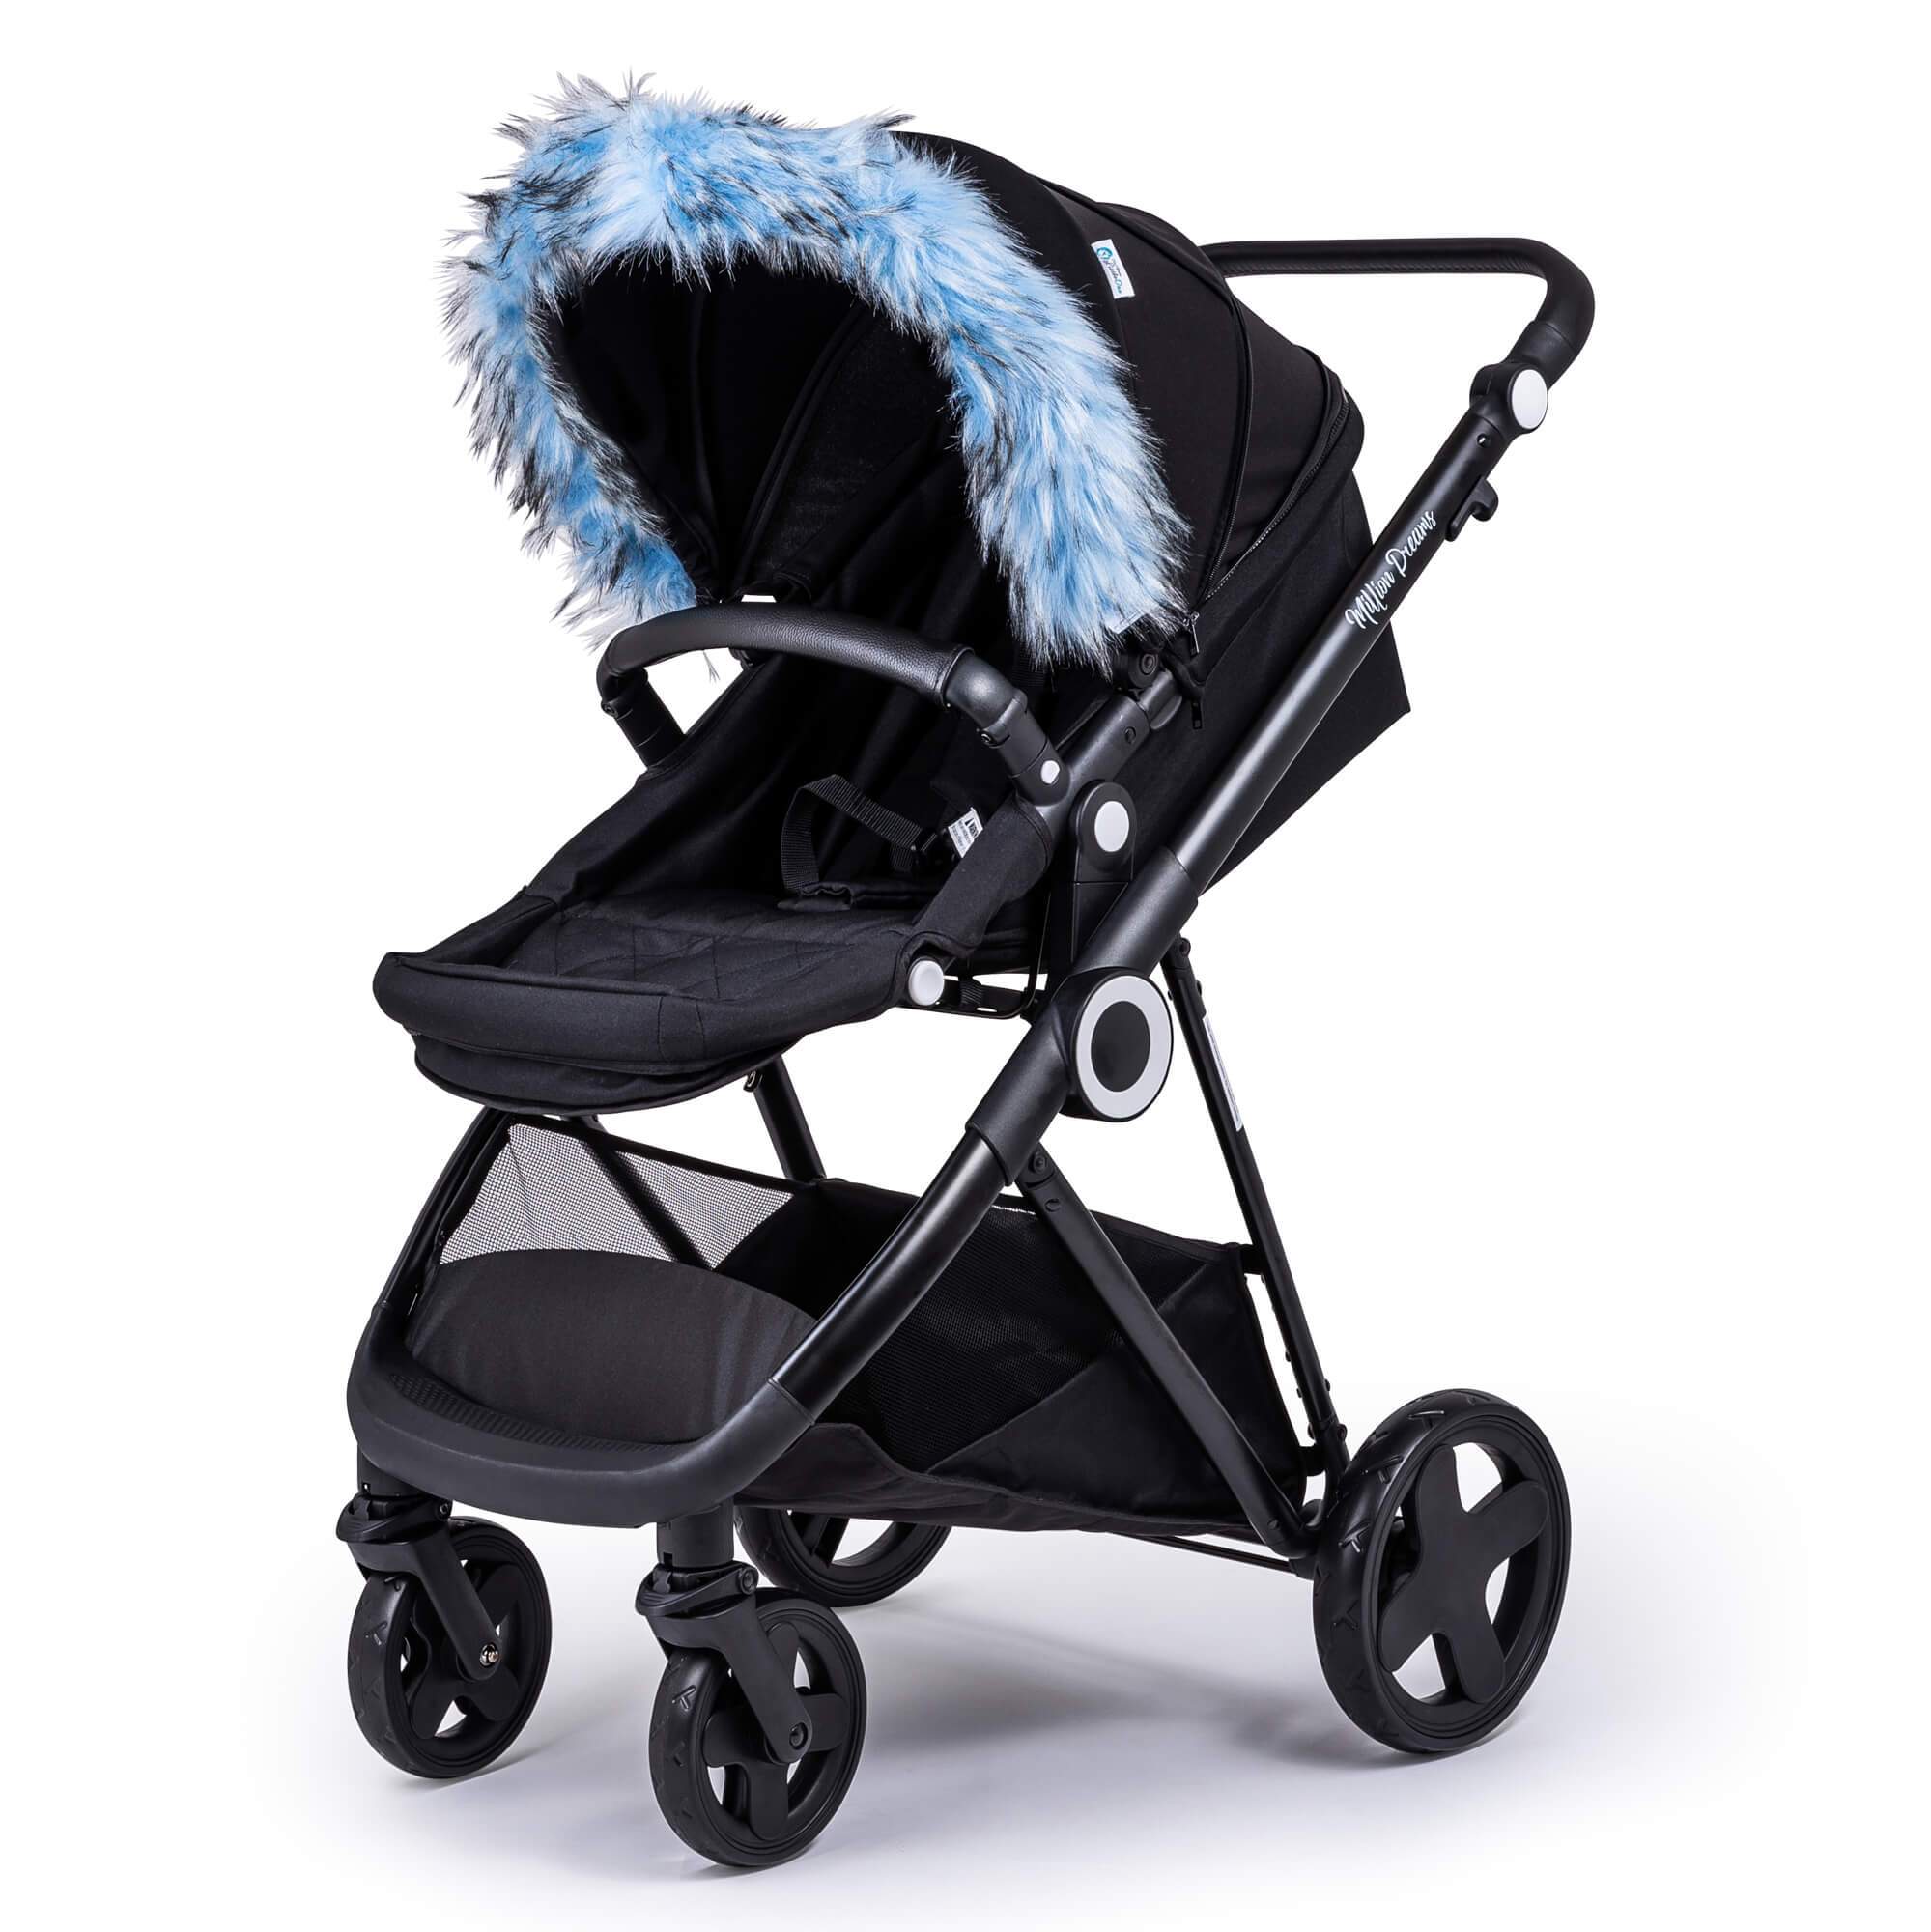 Pram Fur Hood Trim Attachment for Pushchair Compatible with BabyStyle - Light Blue / Fits All Models | For Your Little One